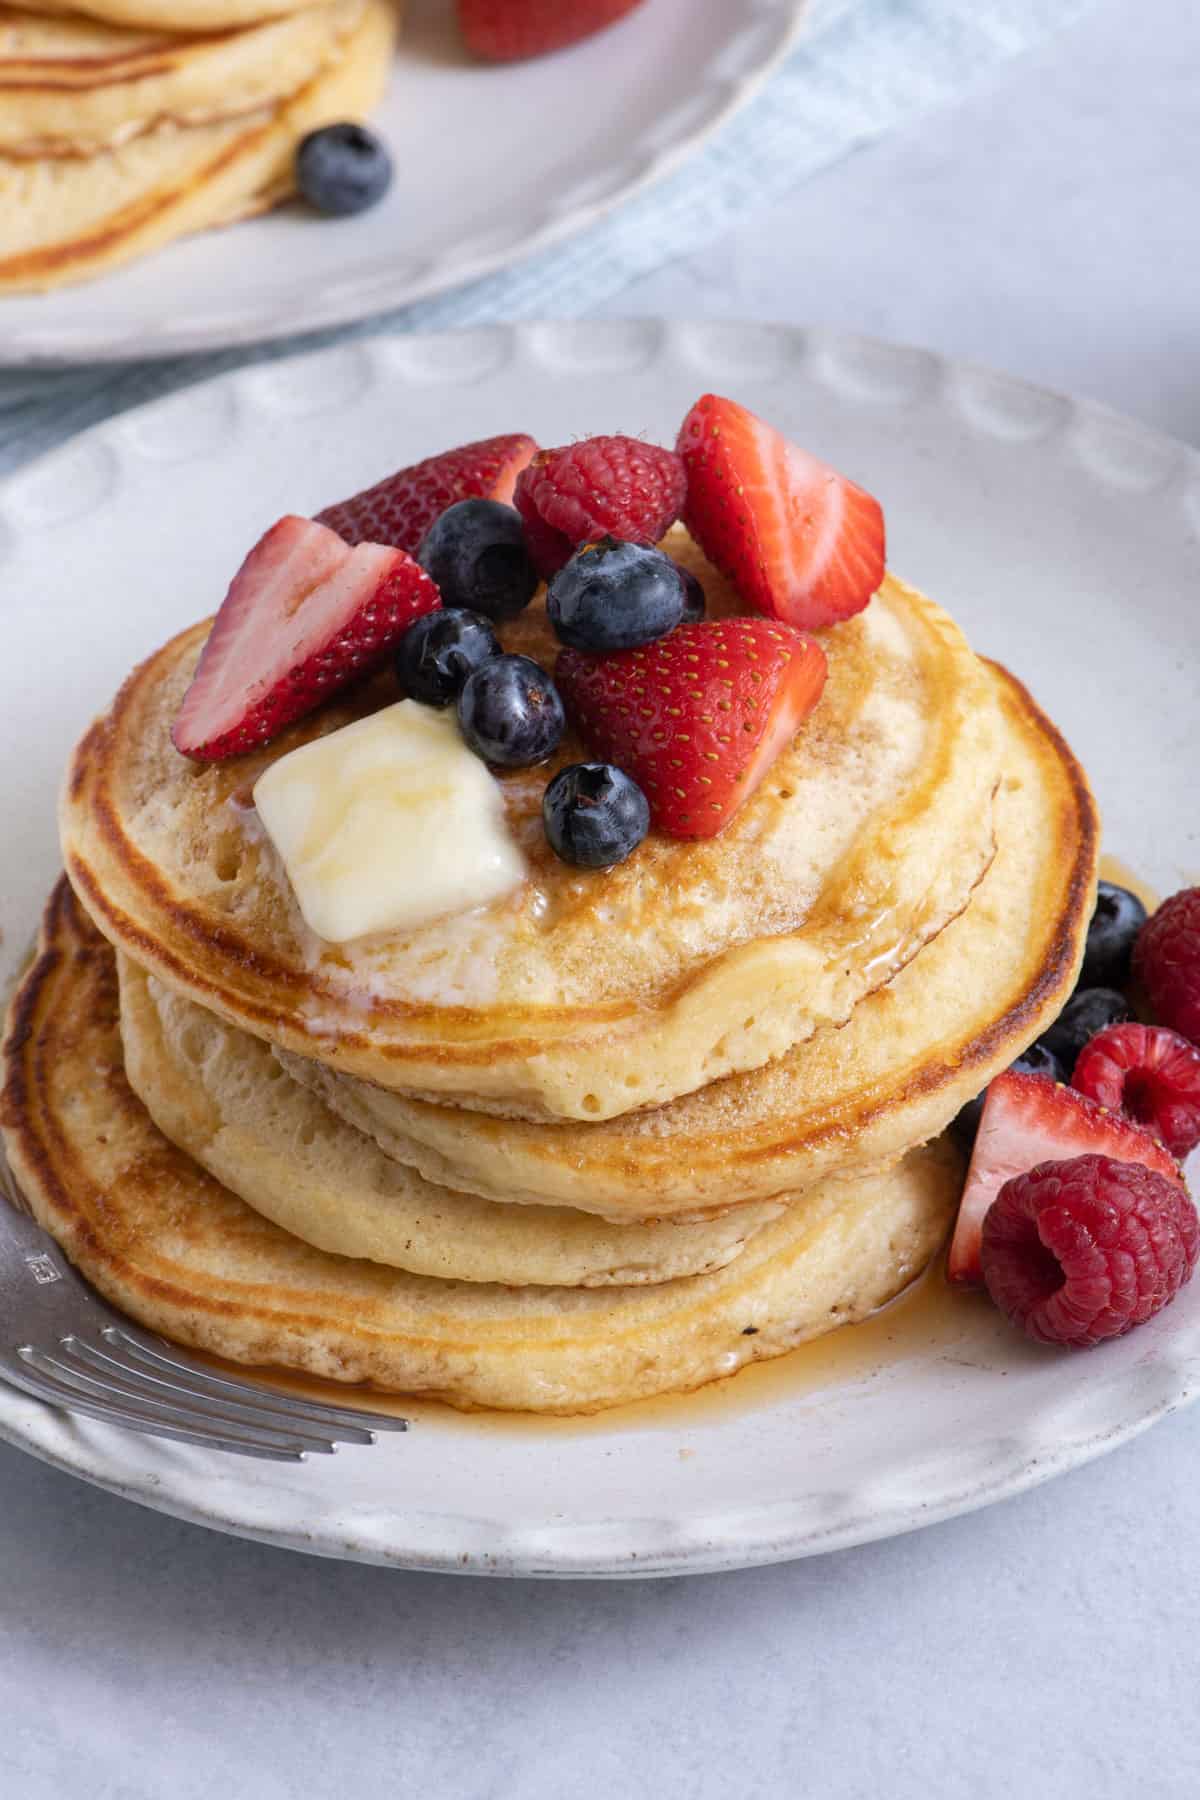 Stack of four small homemade pancakes topped with butter, strawberries, raspberries, and blueberries and served on a white plate with fork off to side.